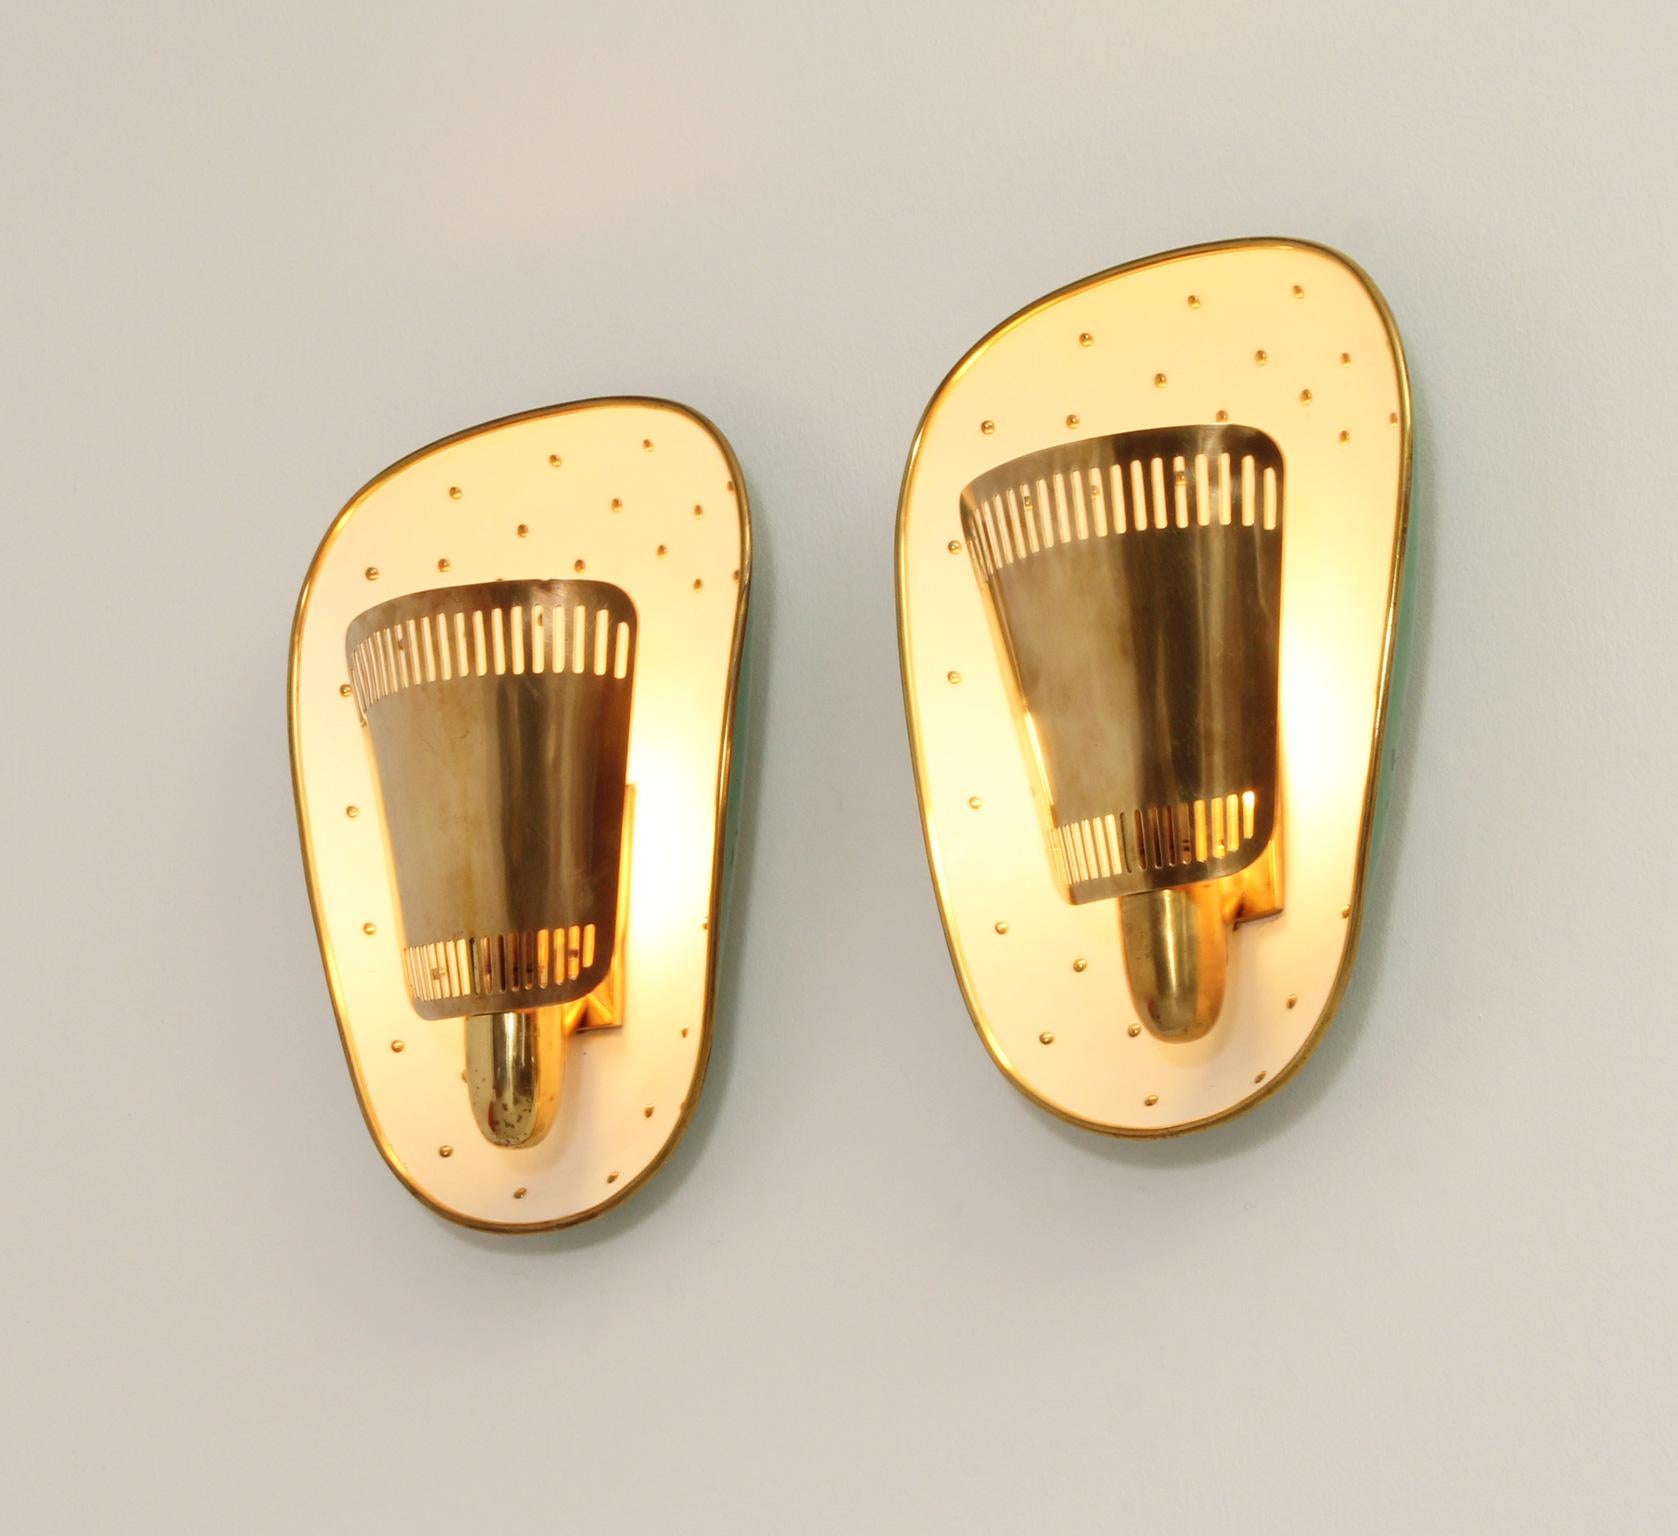 Large Midcentury Sconces Attributed to Hillebrand, Germany, 1950s For Sale 7